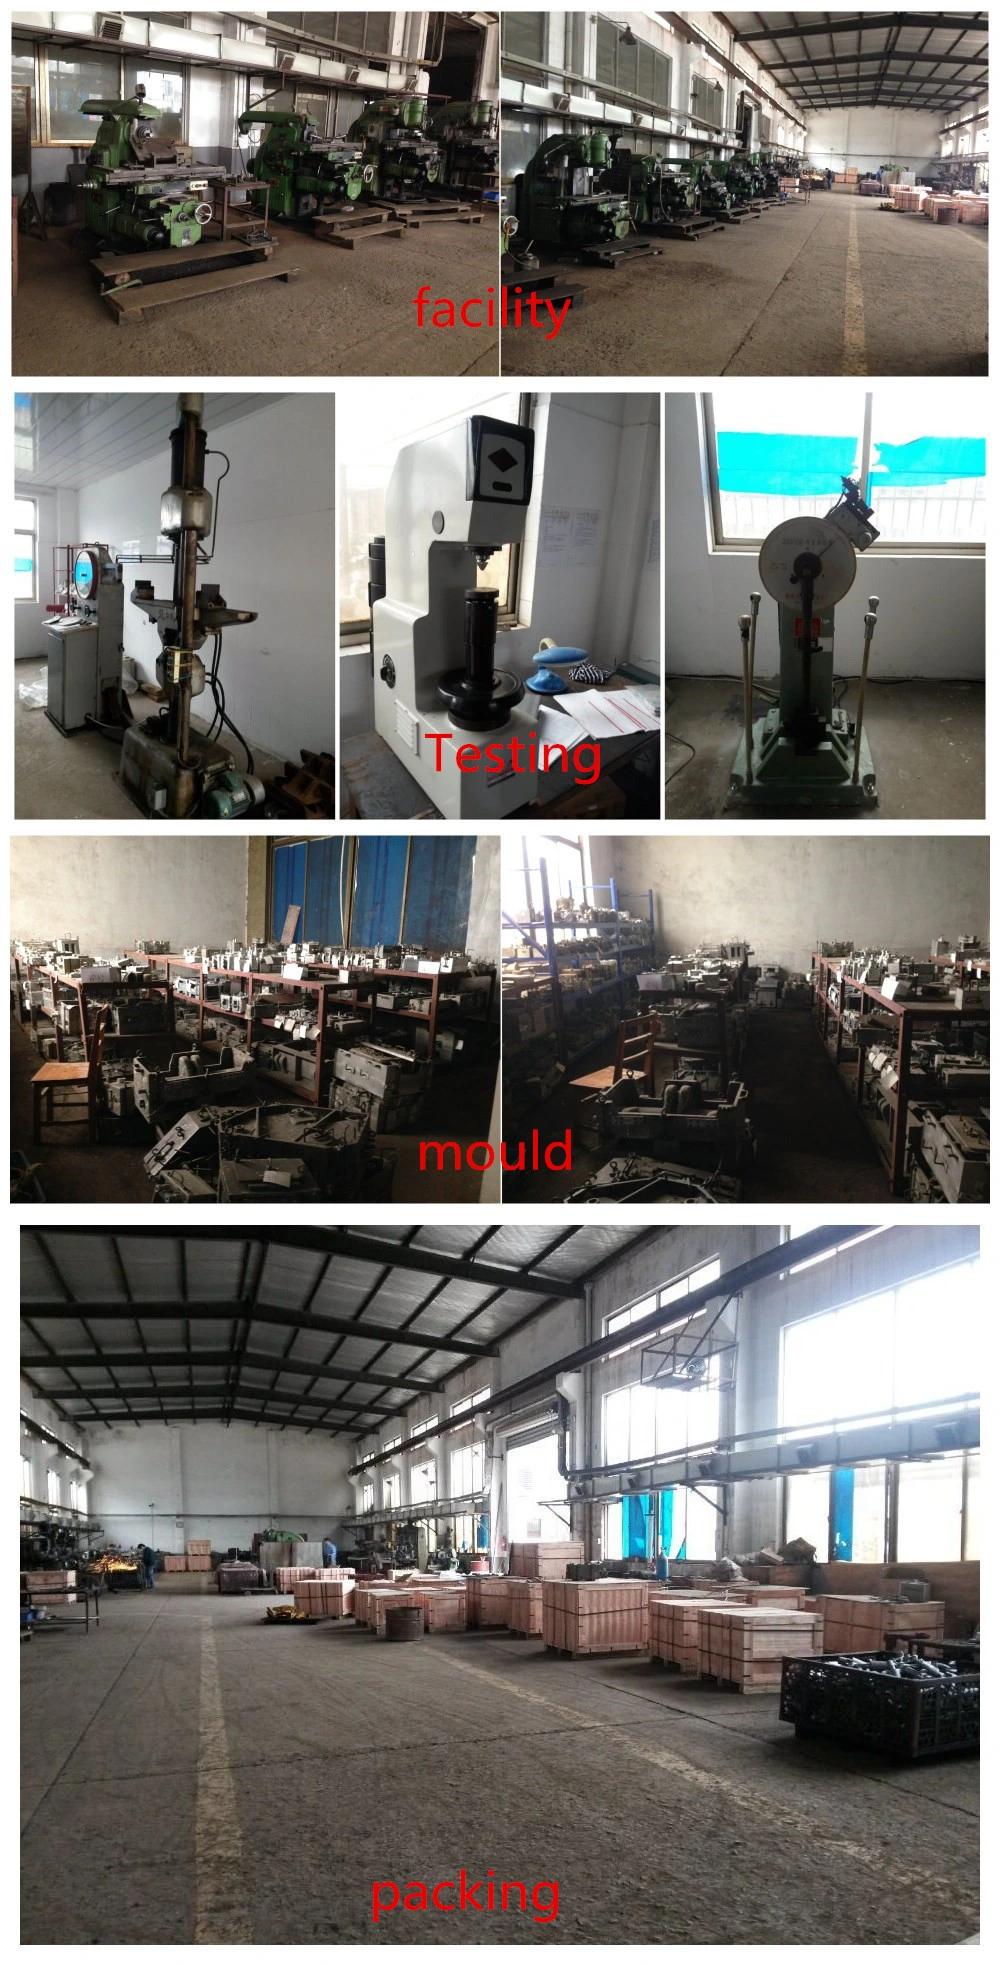 Investment Casting Lost Wax Casting Precision Casting by Alloy Steel